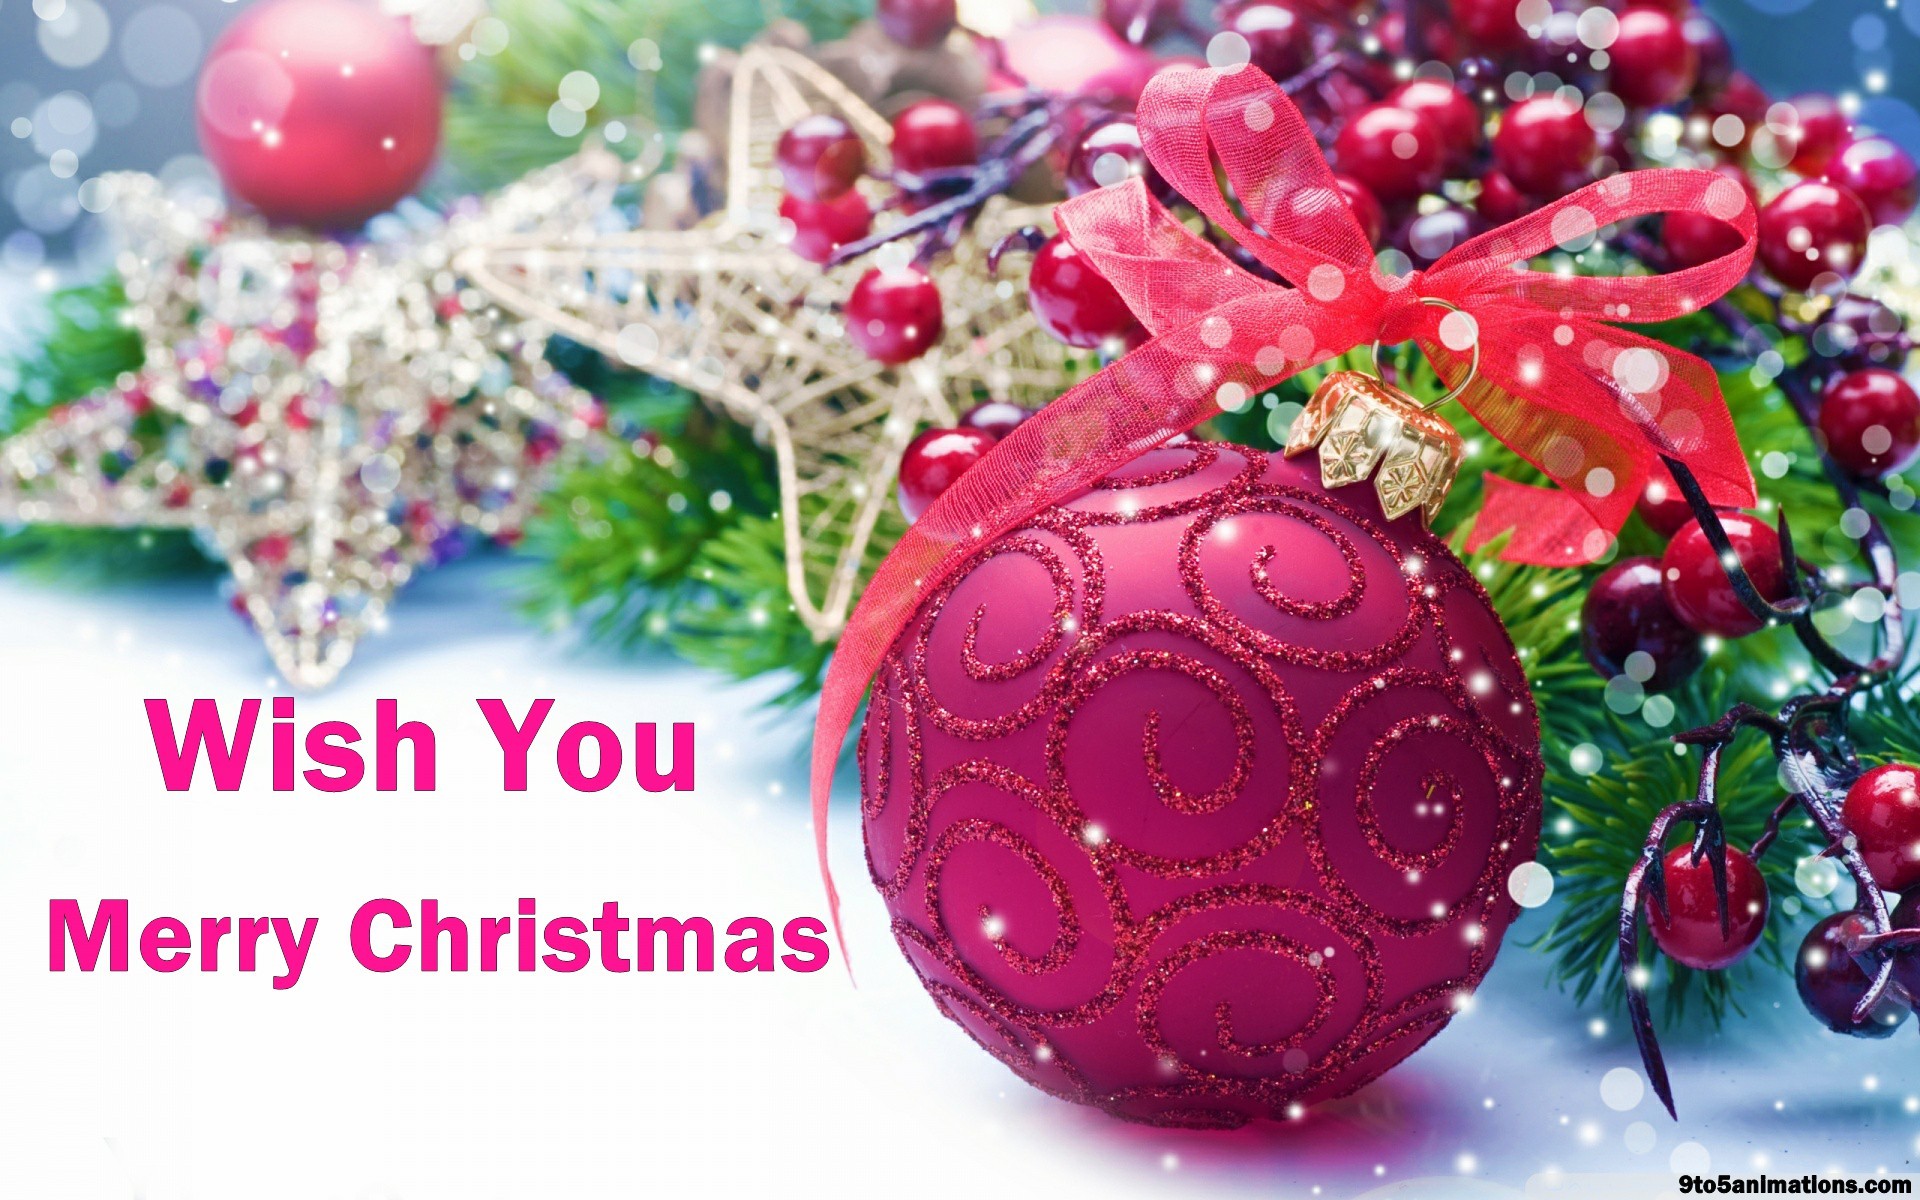 Merry Christmas wishes high definition desktop backgrounds